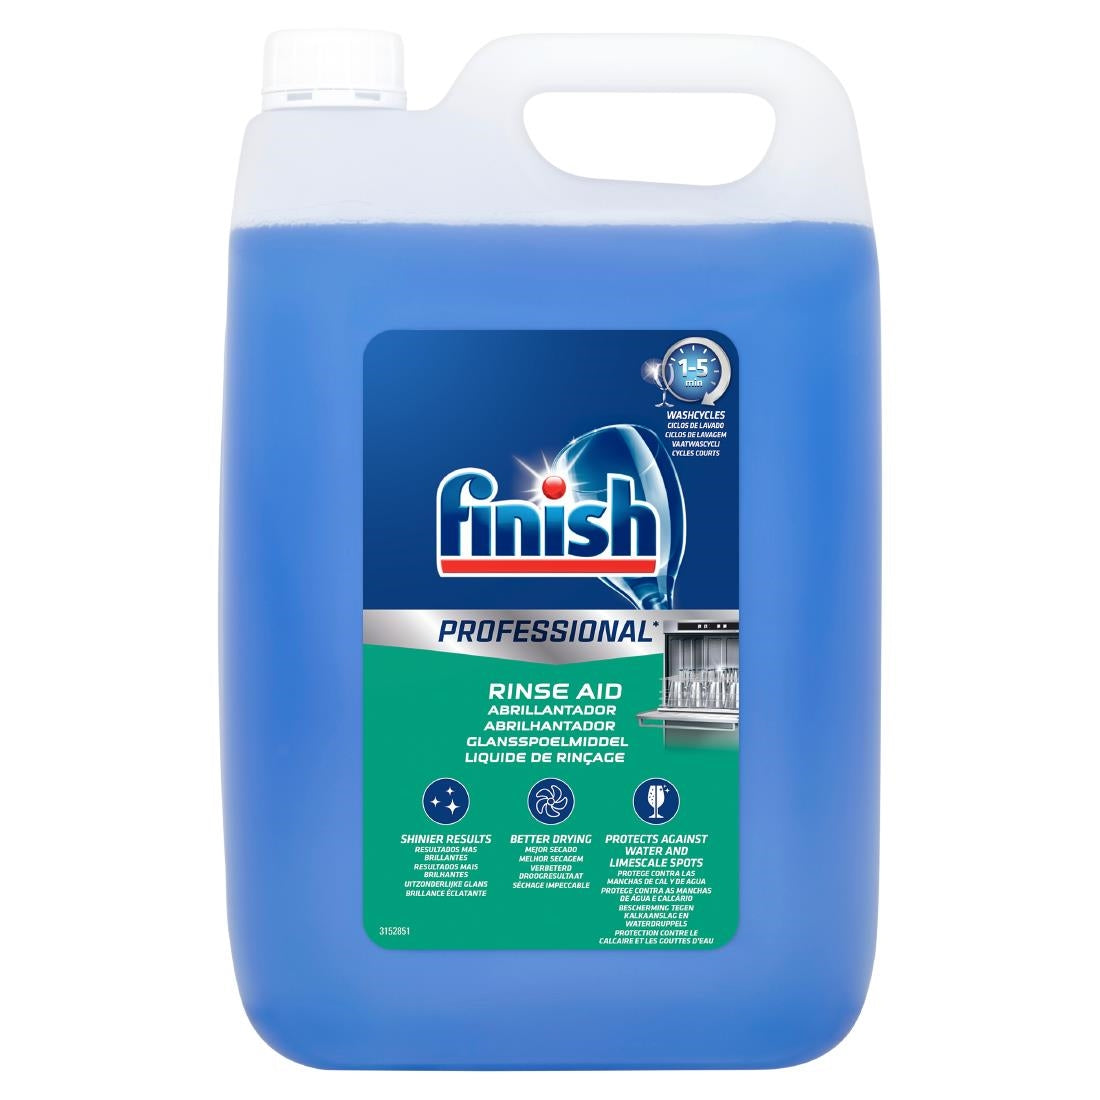 CU997 Finish Professional Rinse Aid 5Ltr (Pack of 2)